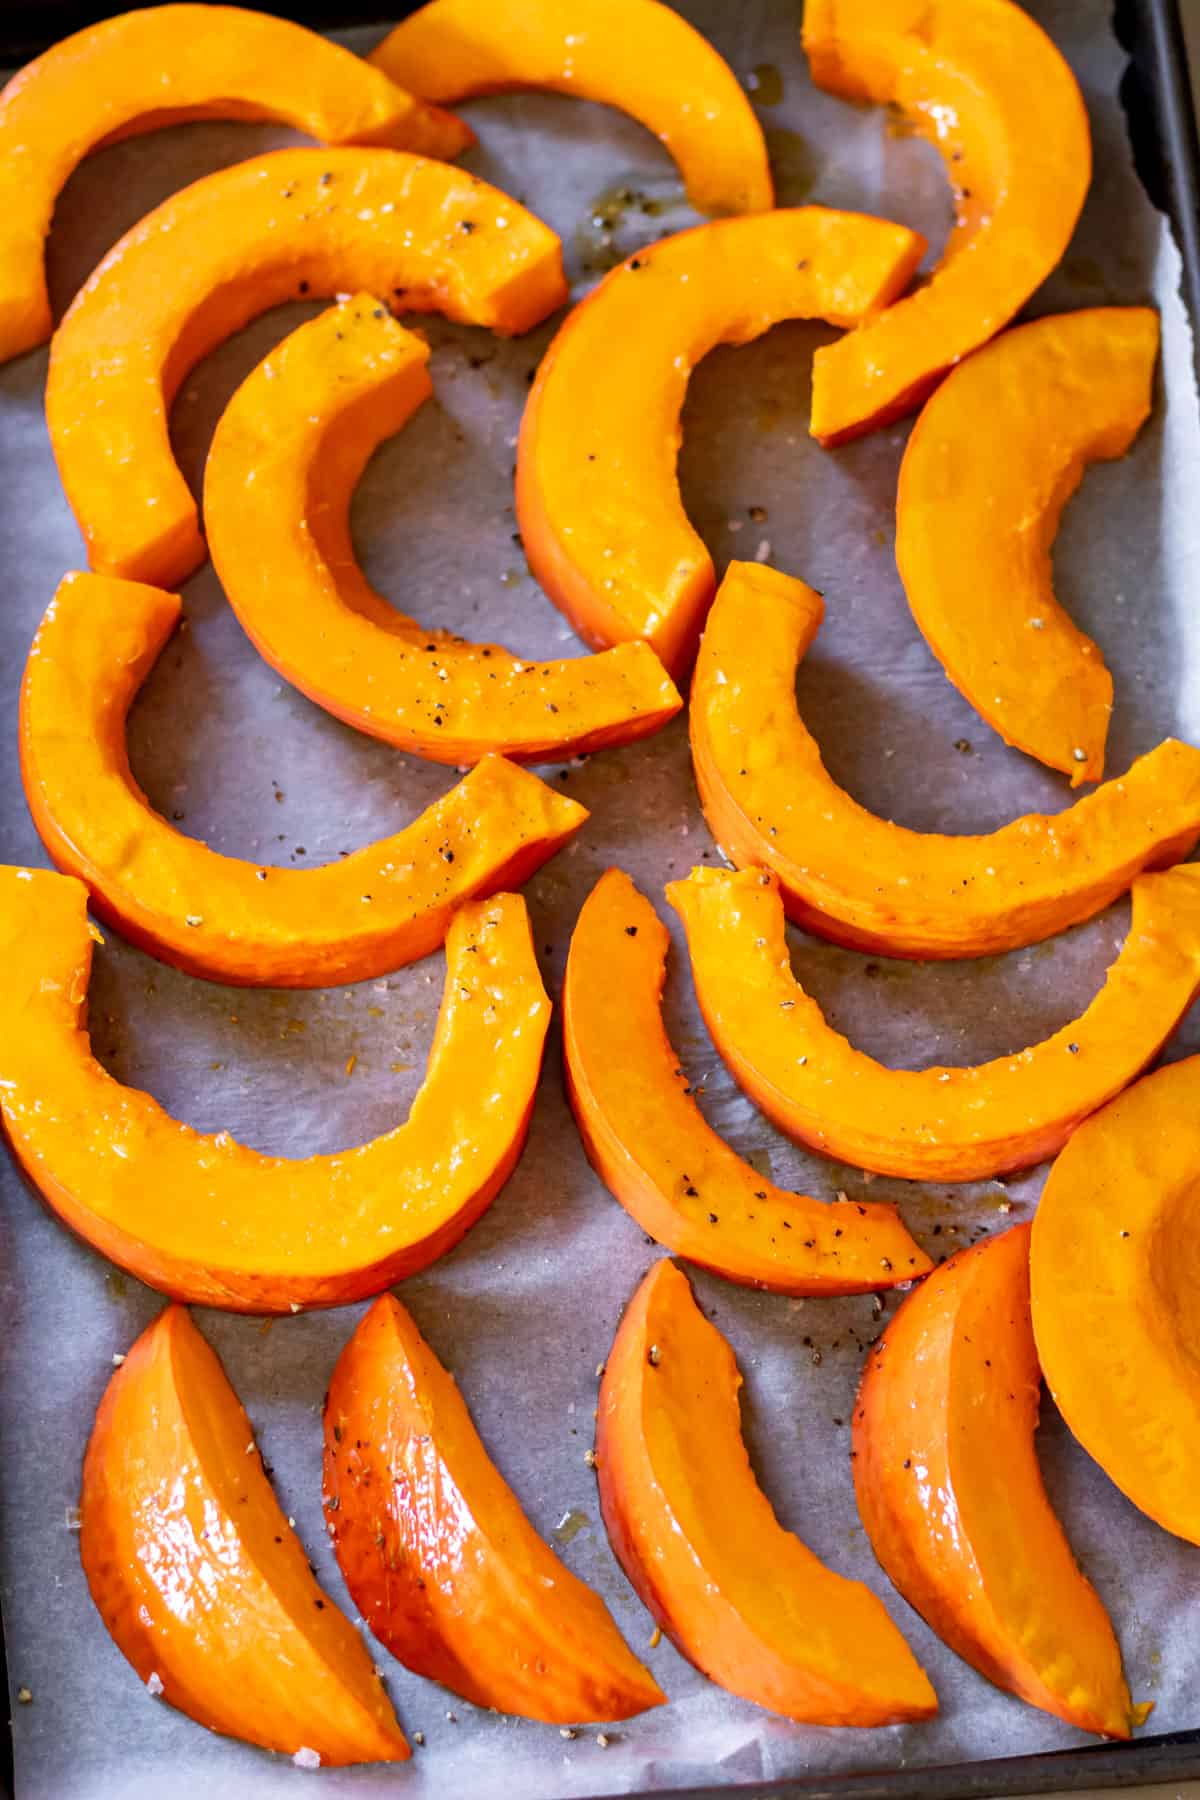 Slices of squash on a baking sheet.